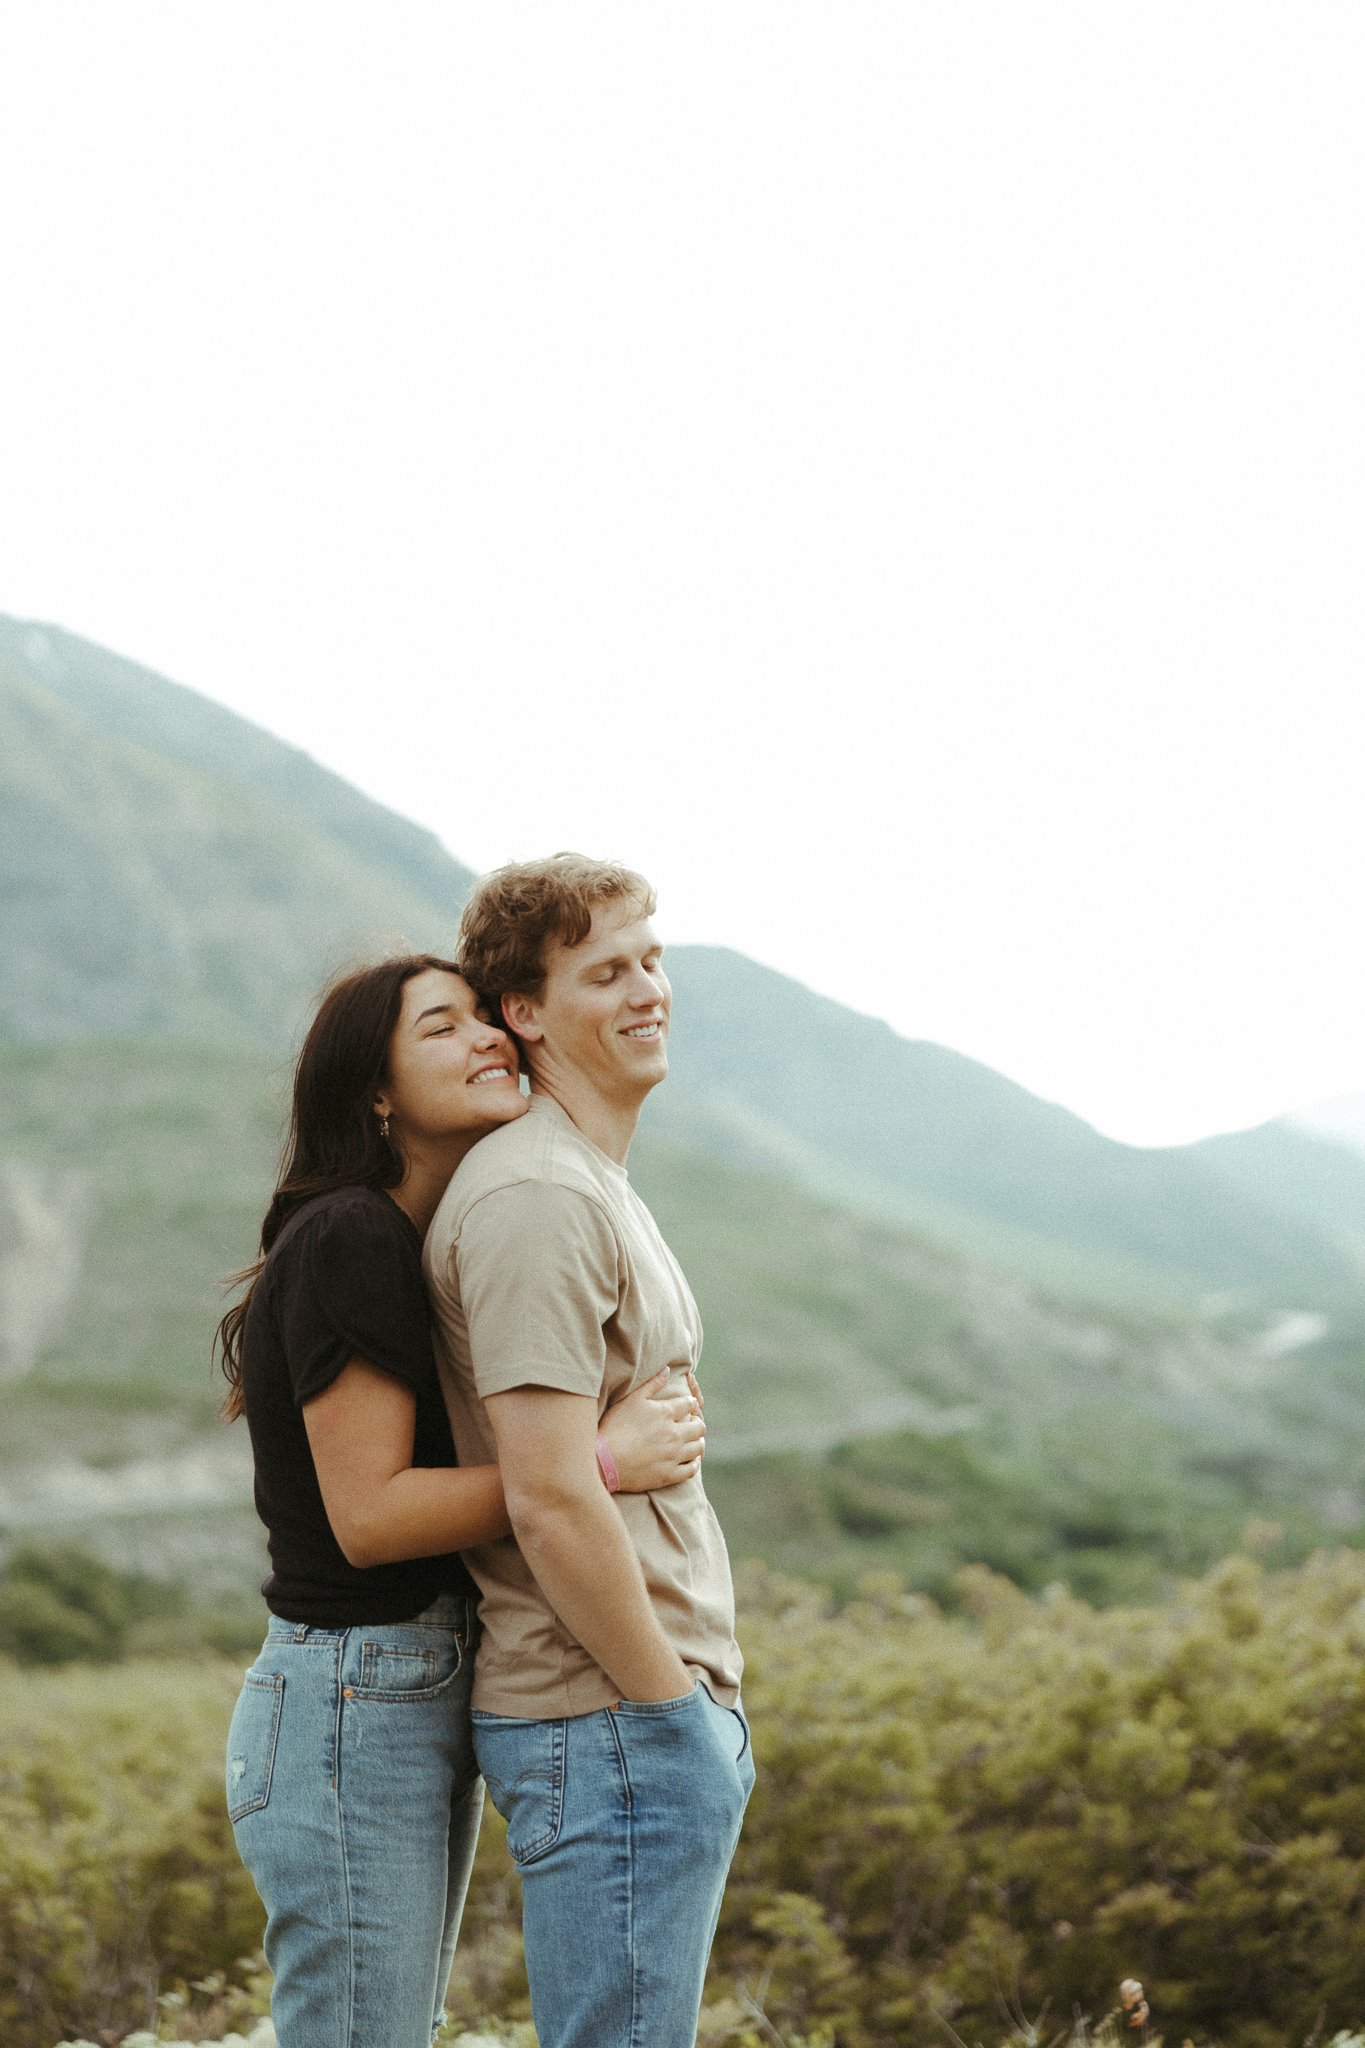 Spring-Provo-Canyon-Wildflowers-Engagement-Session-61